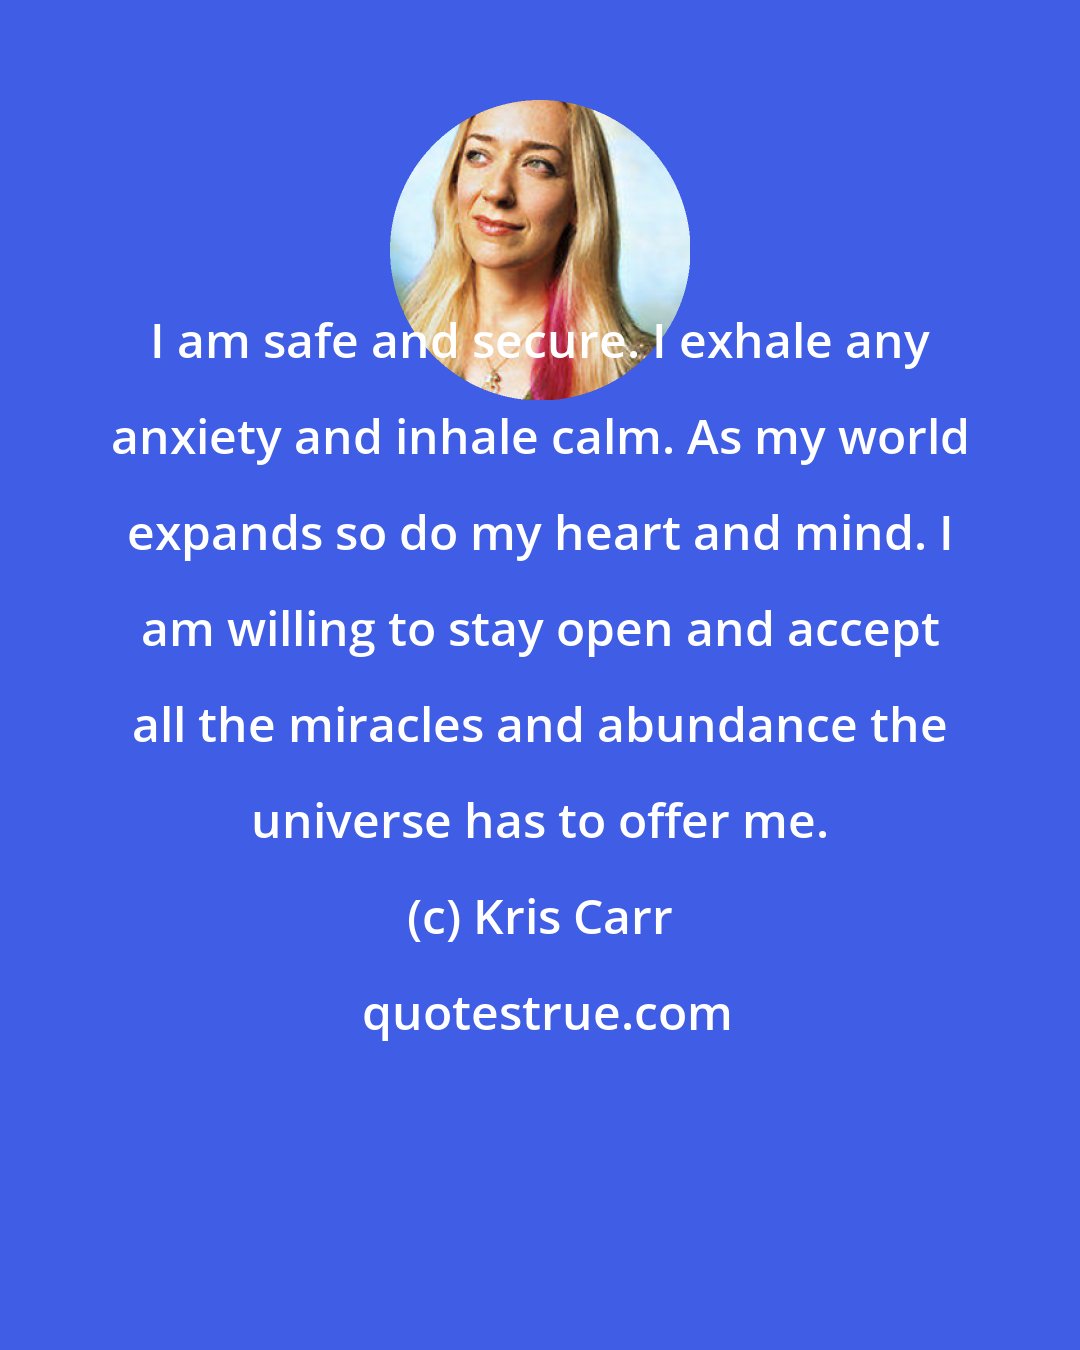 Kris Carr: I am safe and secure. I exhale any anxiety and inhale calm. As my world expands so do my heart and mind. I am willing to stay open and accept all the miracles and abundance the universe has to offer me.